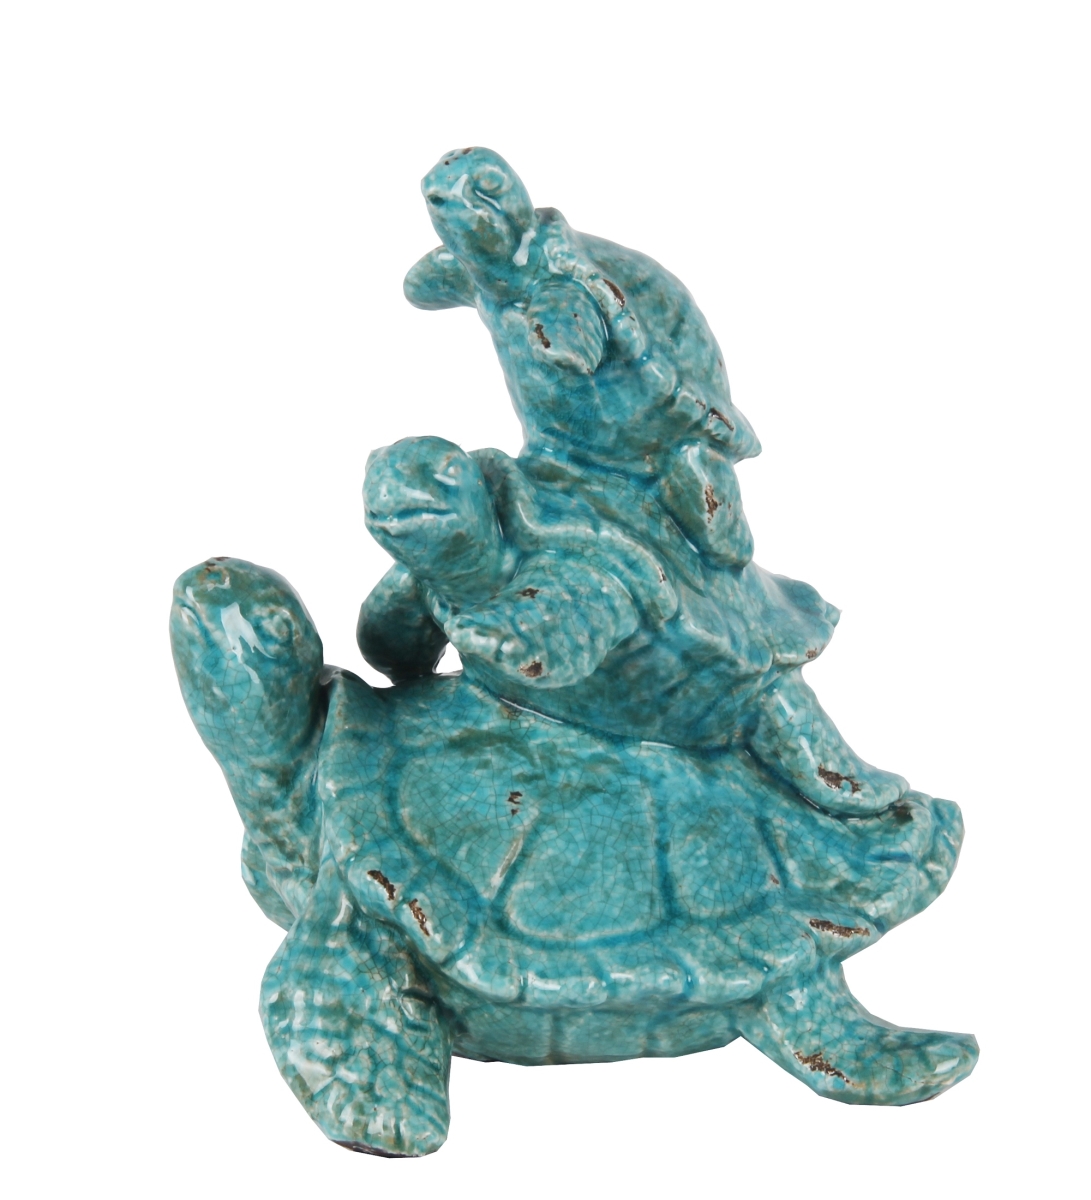 20288 8 X 7 X 10 In. Traditional Ceramic Stacked Turtles Statue, Blue